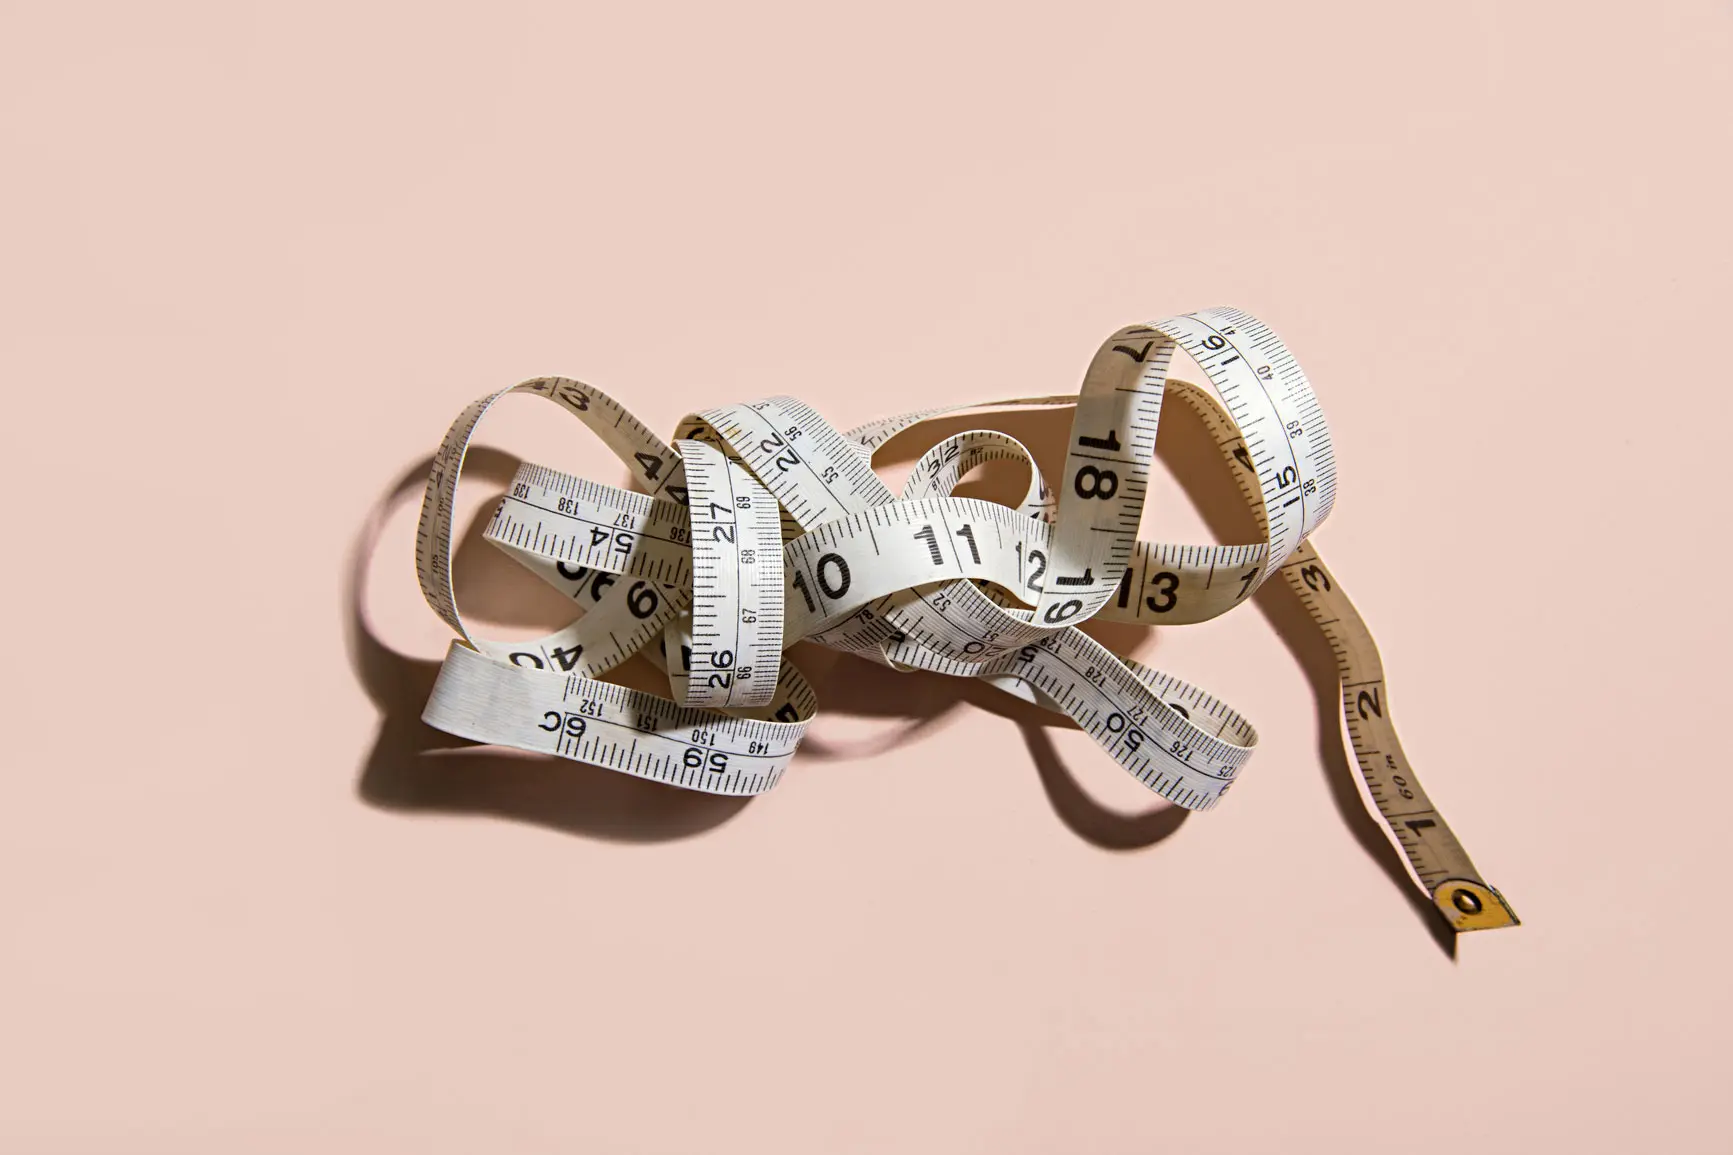 Crumpled measuring tape on light peach background. AW207